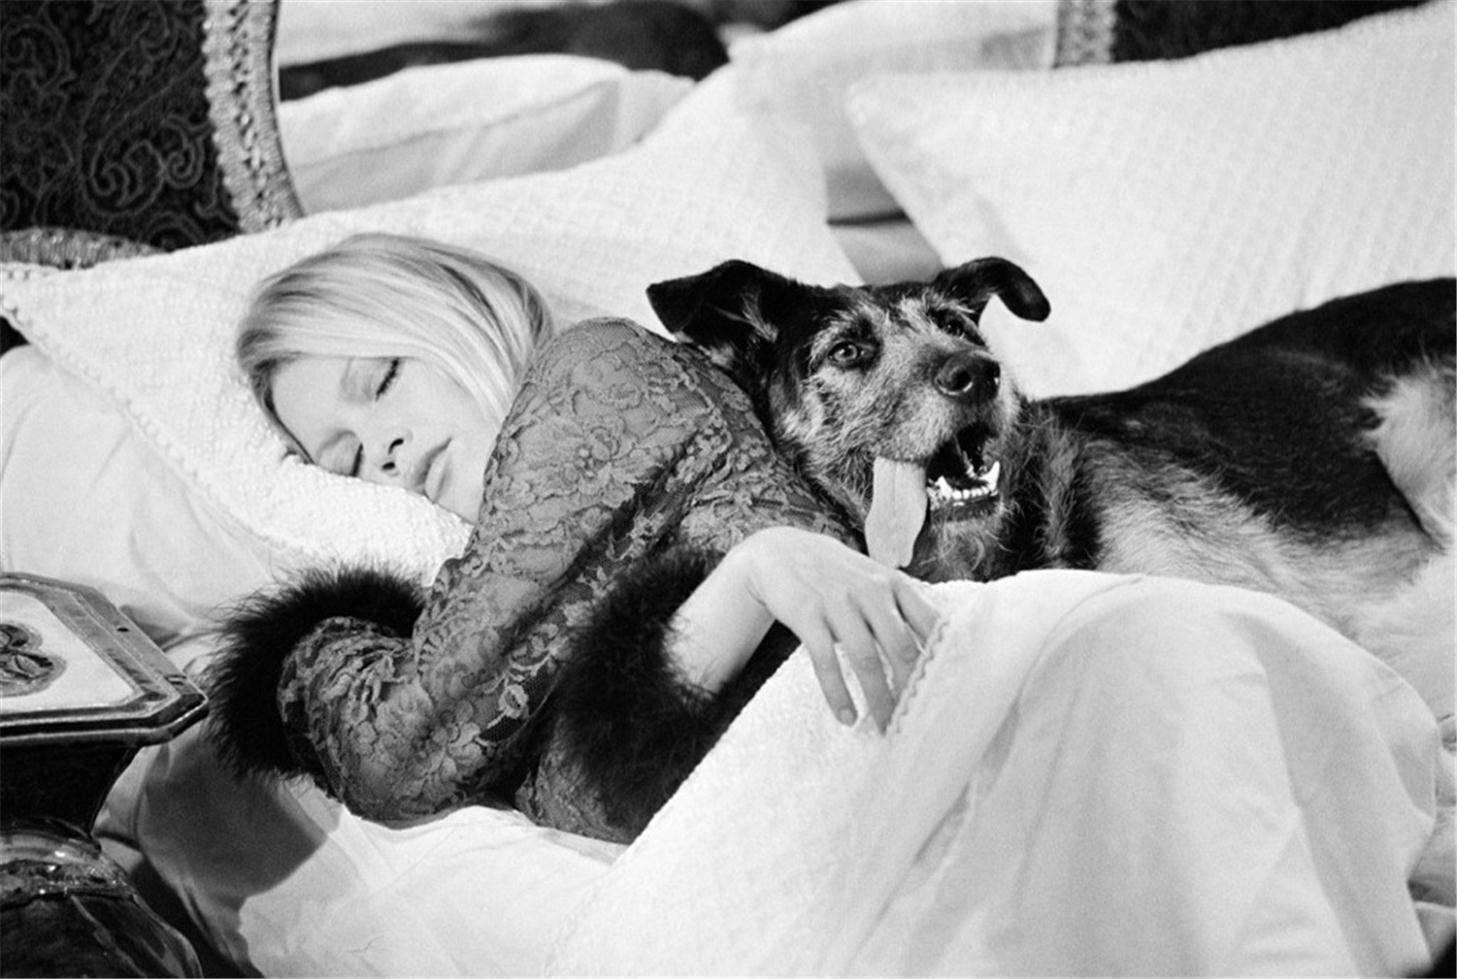 Brigitte Bardot with dog, on set of Les Novices (Co-signed)
Silver Gelatin Print
Edition of 50 
16 x 20 inches 
Signed and numbered edition of 50
(rare)

French actress Brigitte Bardot during the filming of ‘The Novices’ (Les Novices, 1970) directed